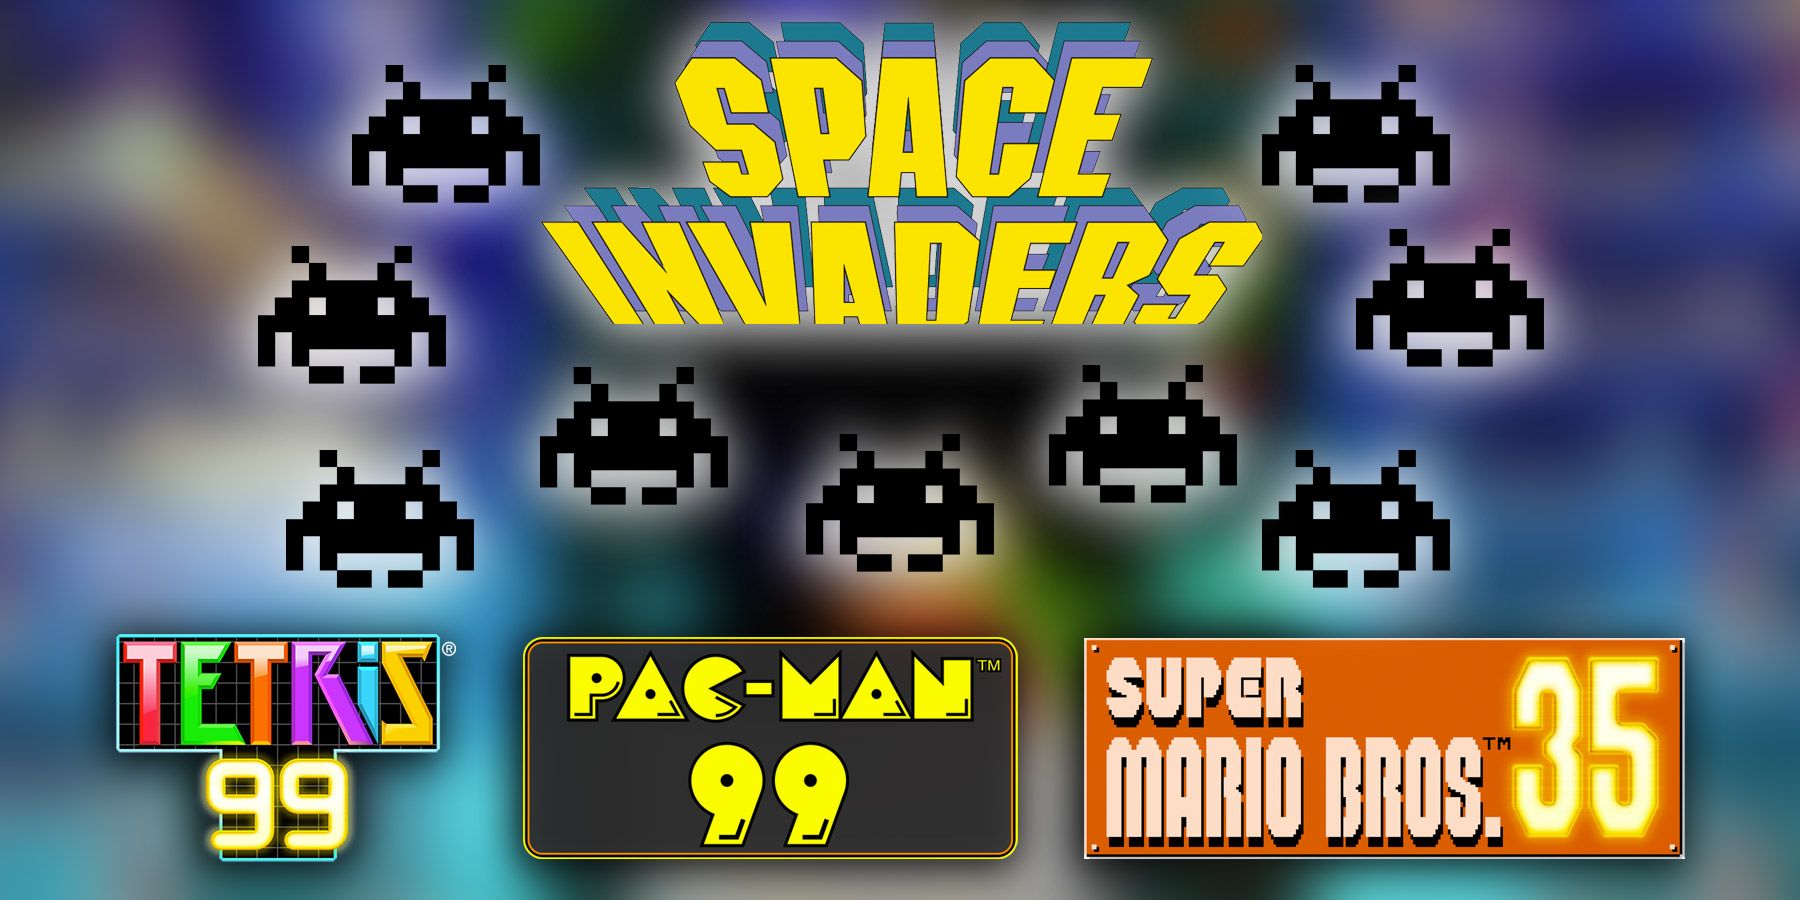 Why Space Invaders 99 Should be the Next Retro Battle Royale